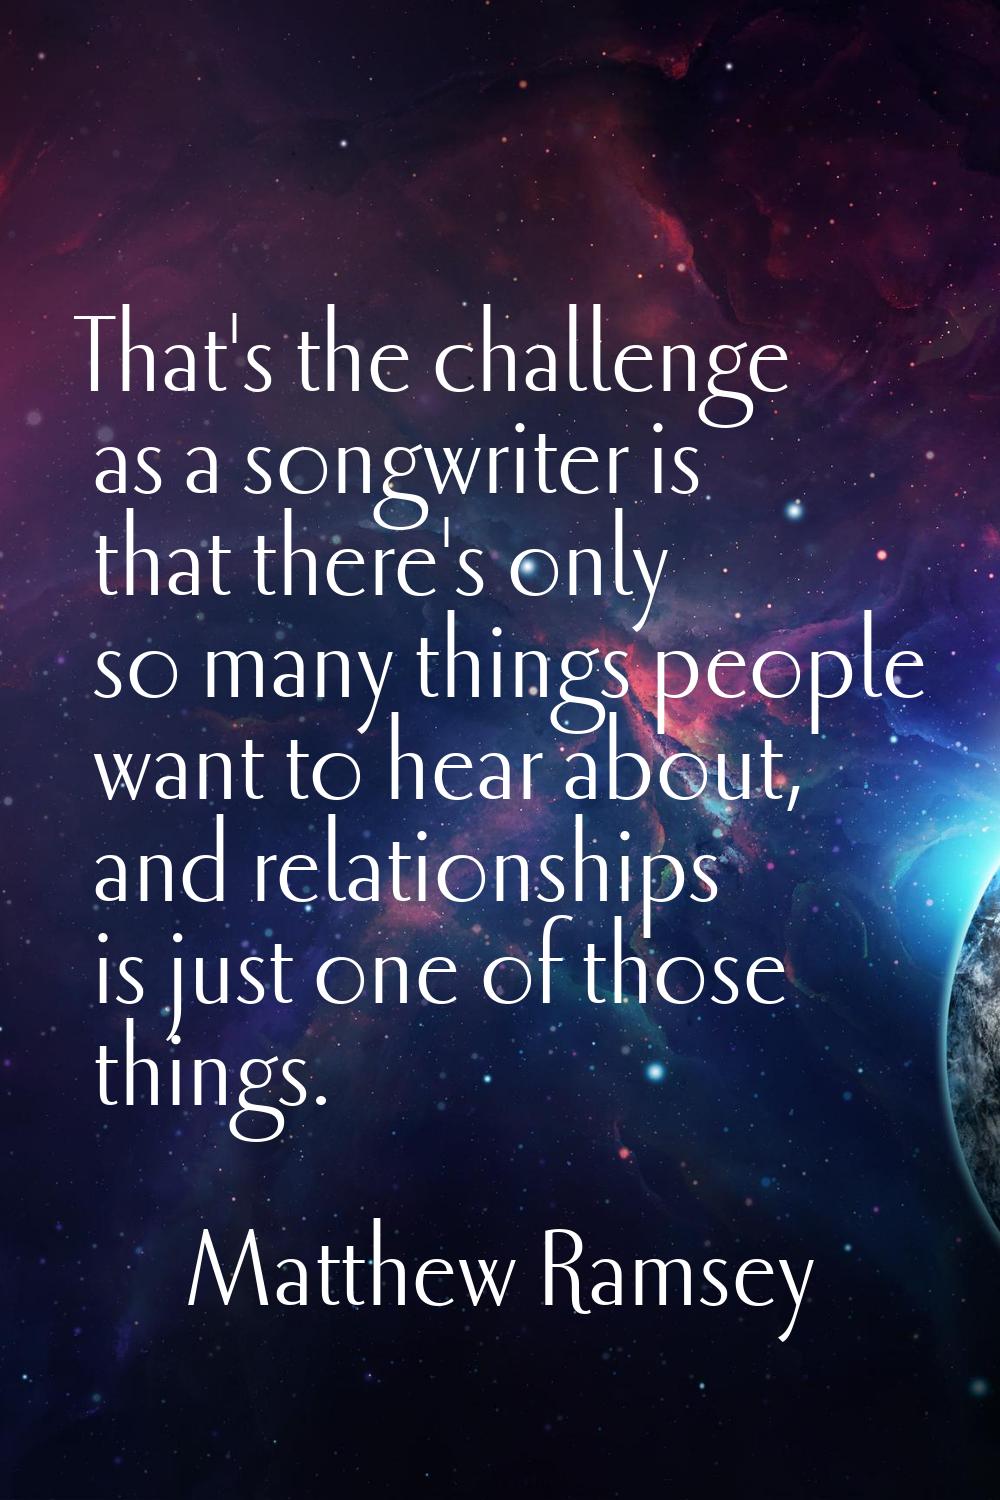 That's the challenge as a songwriter is that there's only so many things people want to hear about,